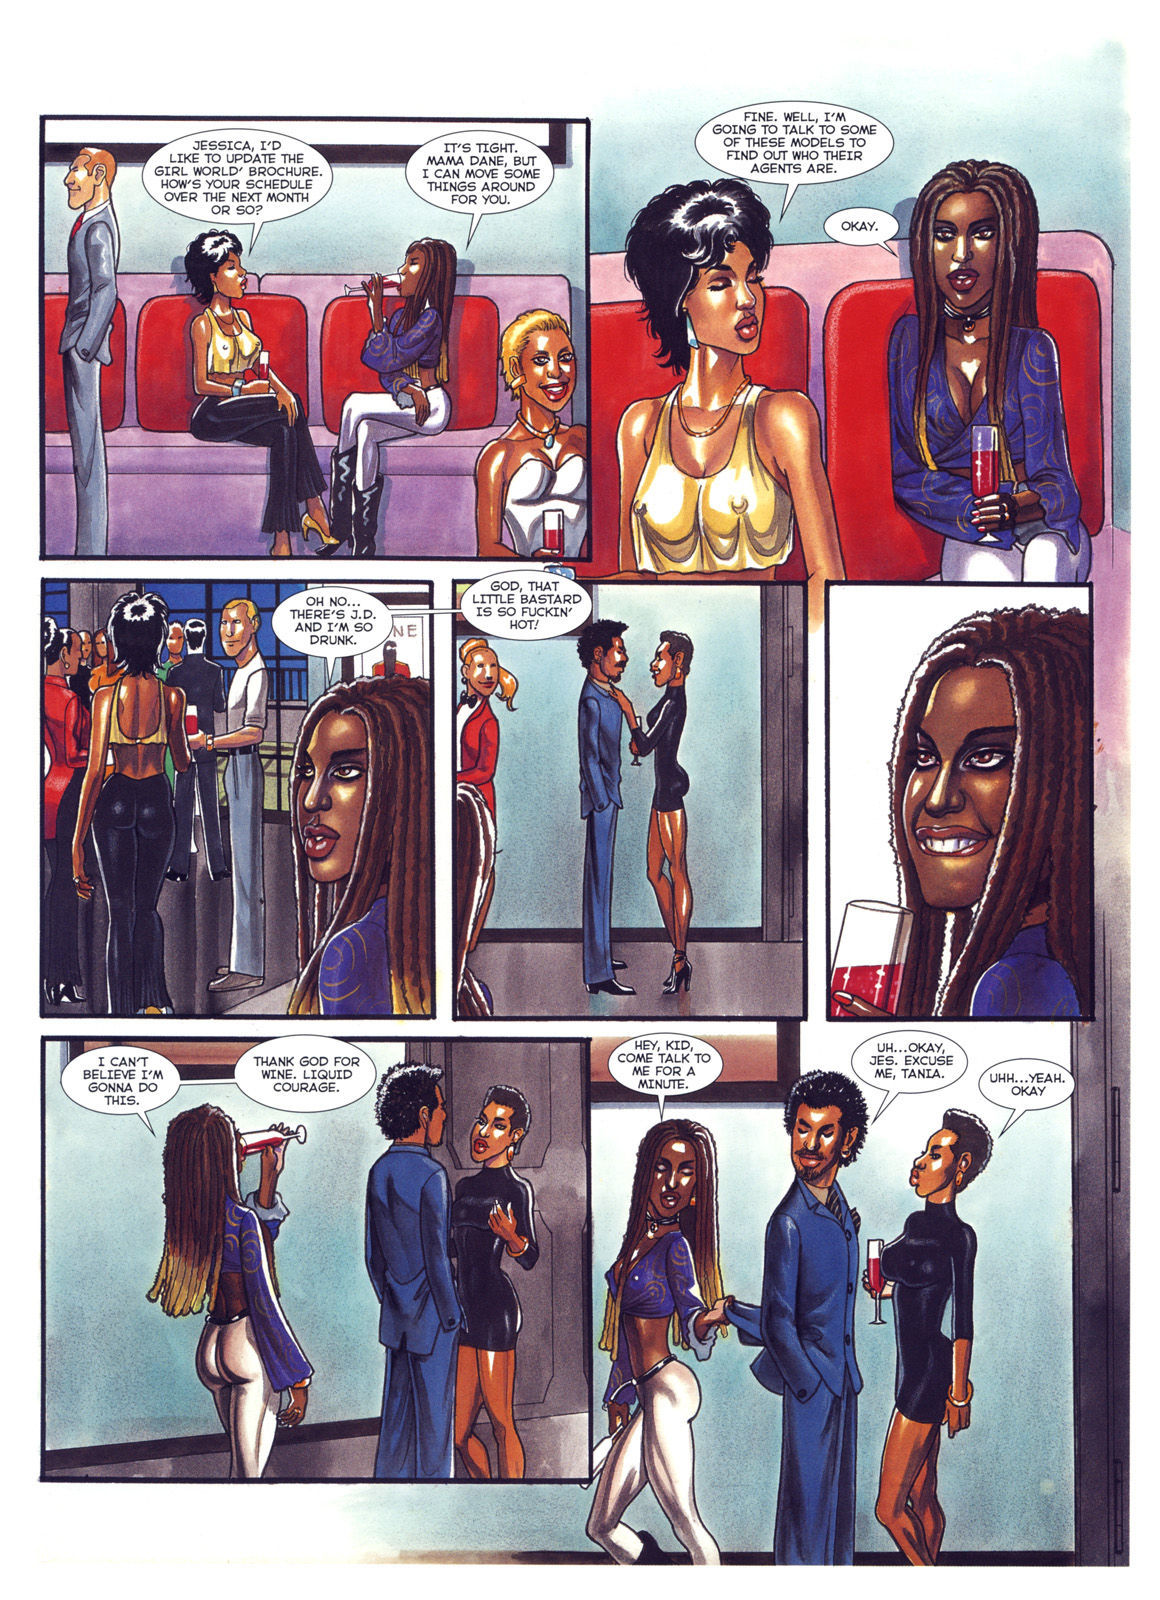 Girl The Second Coming 3 by Kevin J Taylor page 24